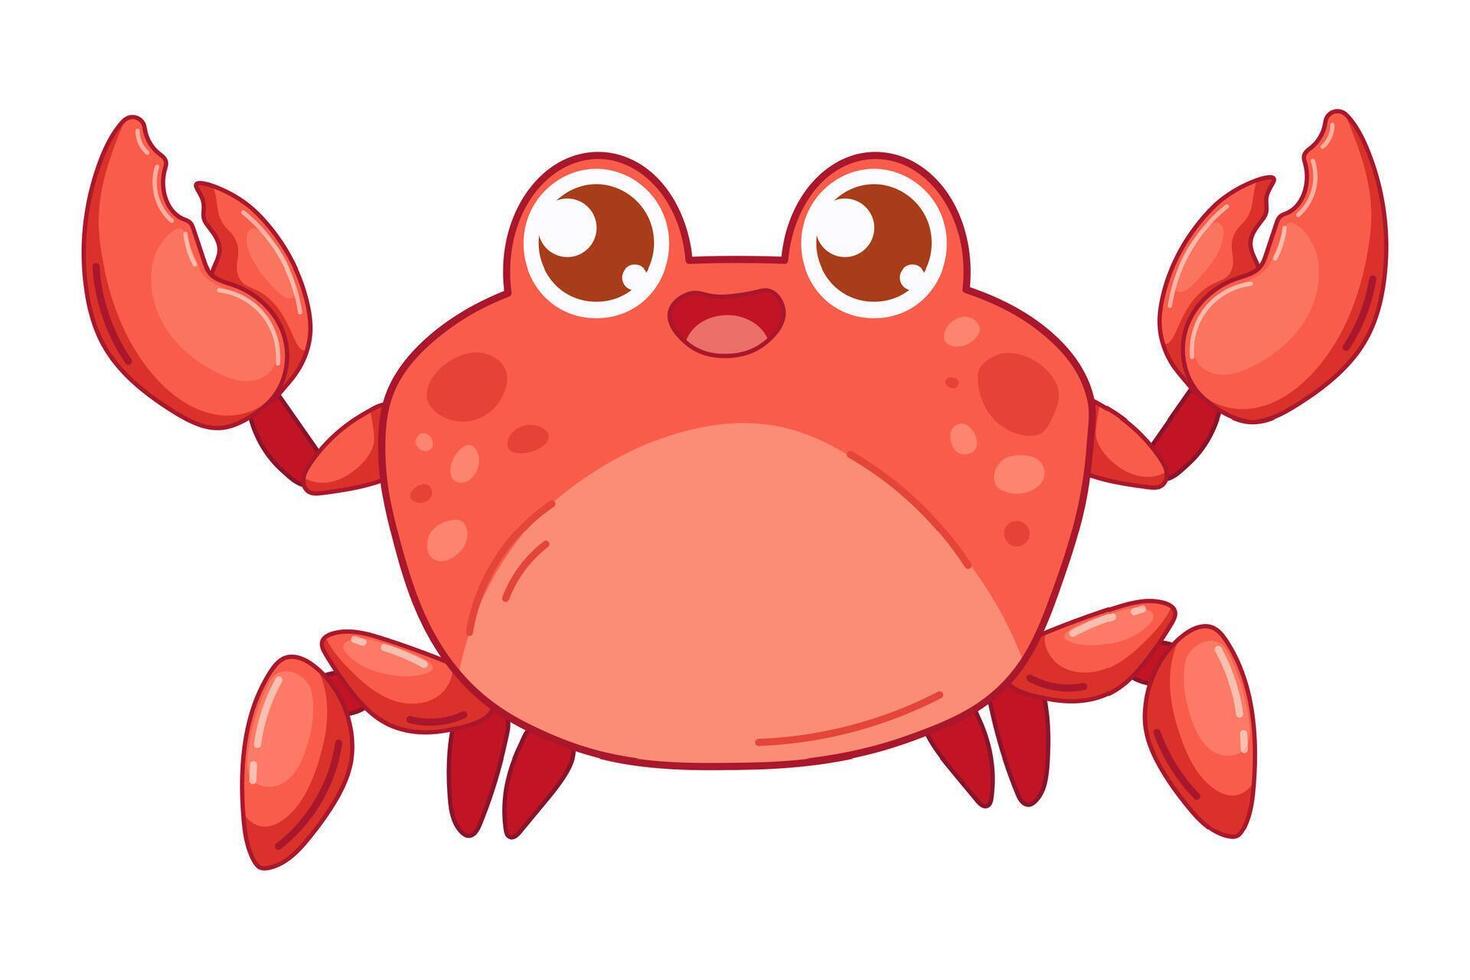 Cute baby crab on white background isolated. Vector illustration of sea life in childish style for prints, textiles, clothes, baby shower